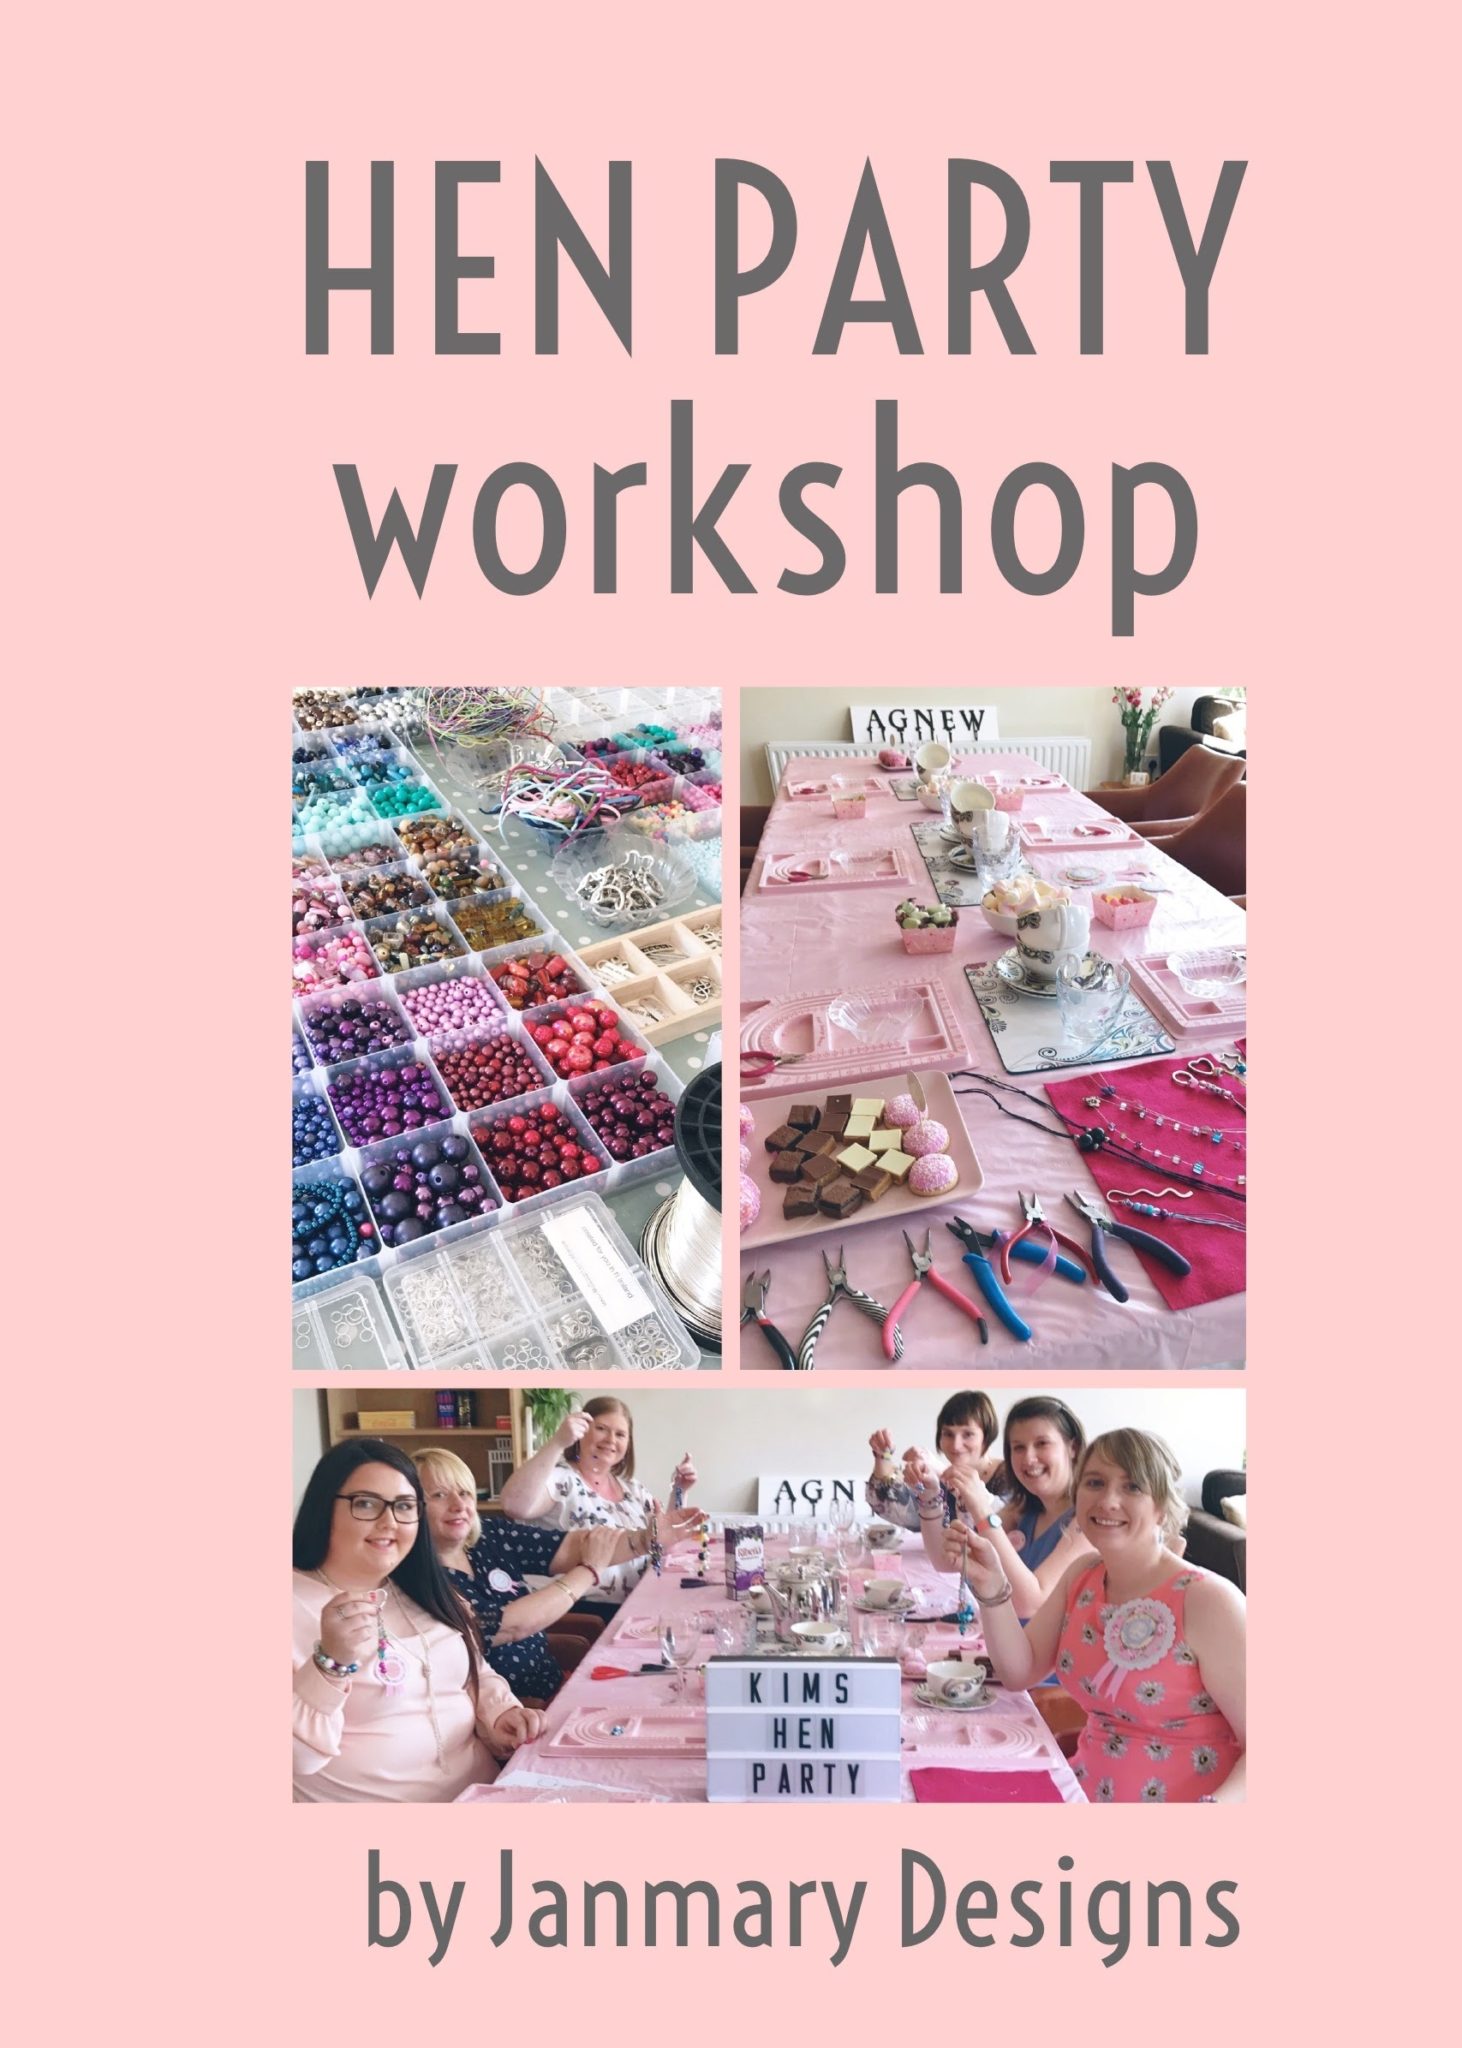 A delightful Northern Ireland hen party by Janmary Designs